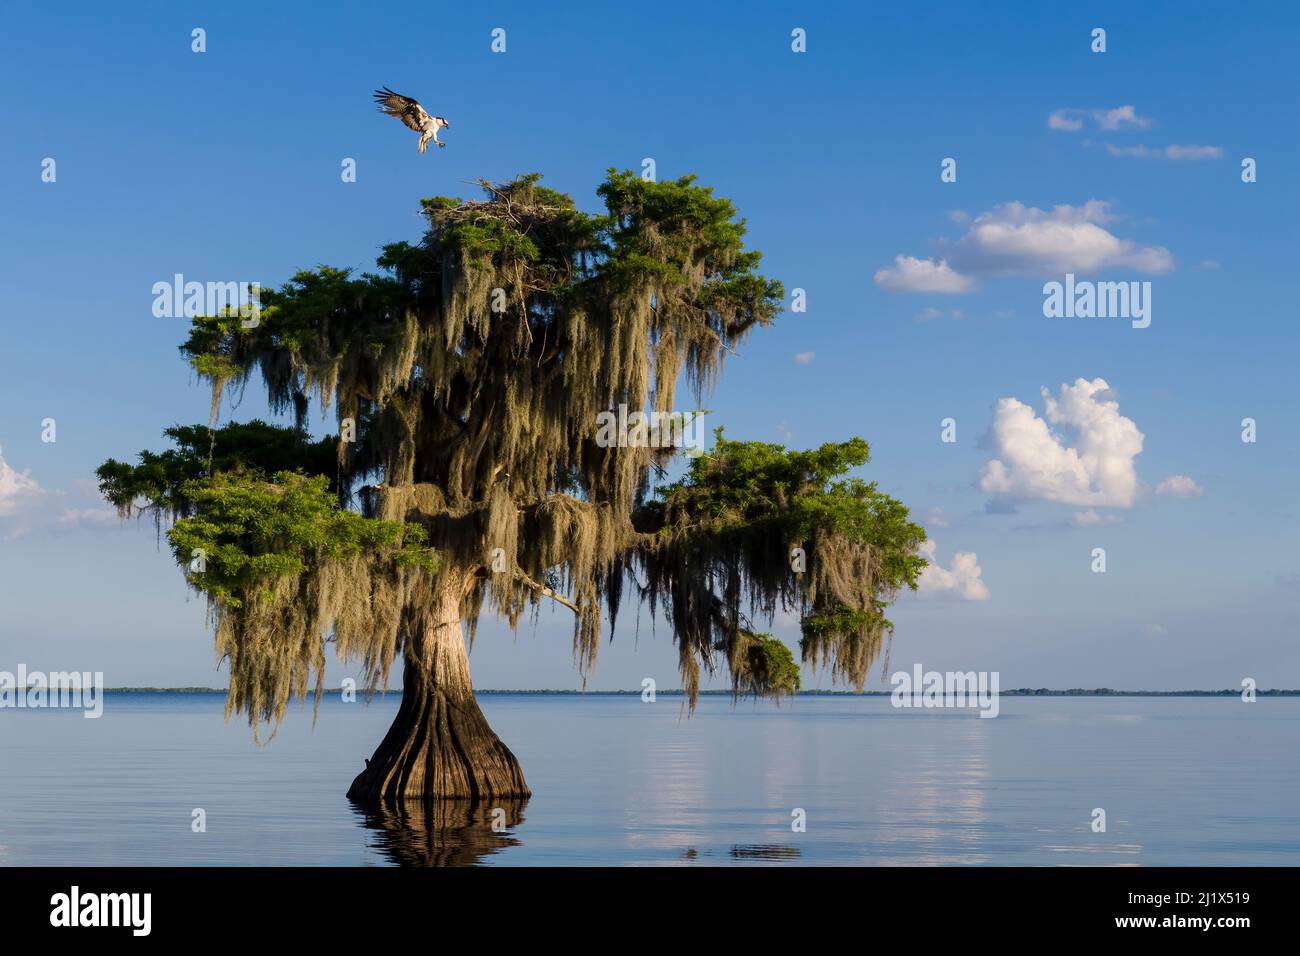 Osprey (Pandion haliaetus) landing at its nest in a Bald cypress tree (Taxodium distichum) draped with epiphytic Spanish moss (Tillandsia usneoides). Stock Photo